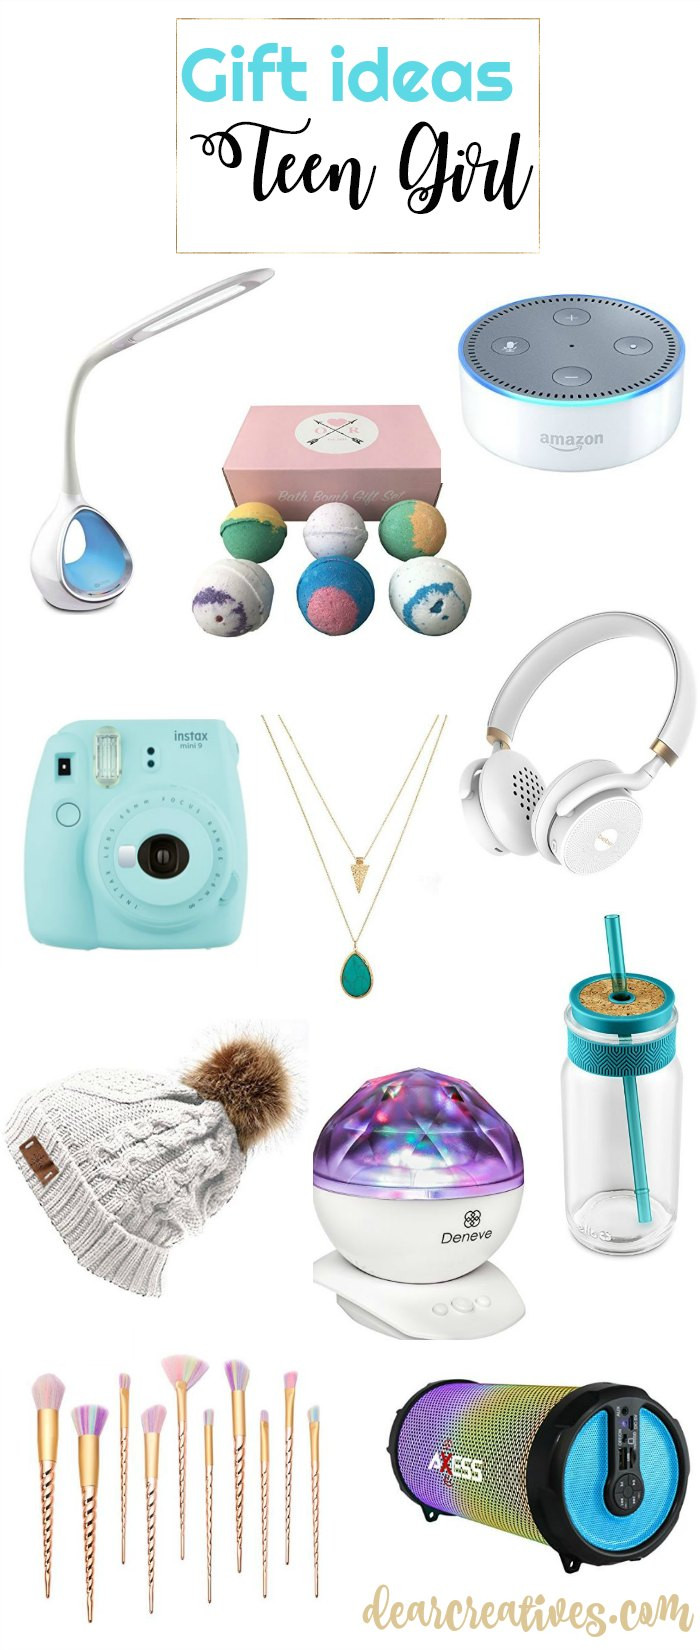 Cool Gift Ideas For Girls
 Gift Ideas for Teen Girls This Gift Guide Packed Full of